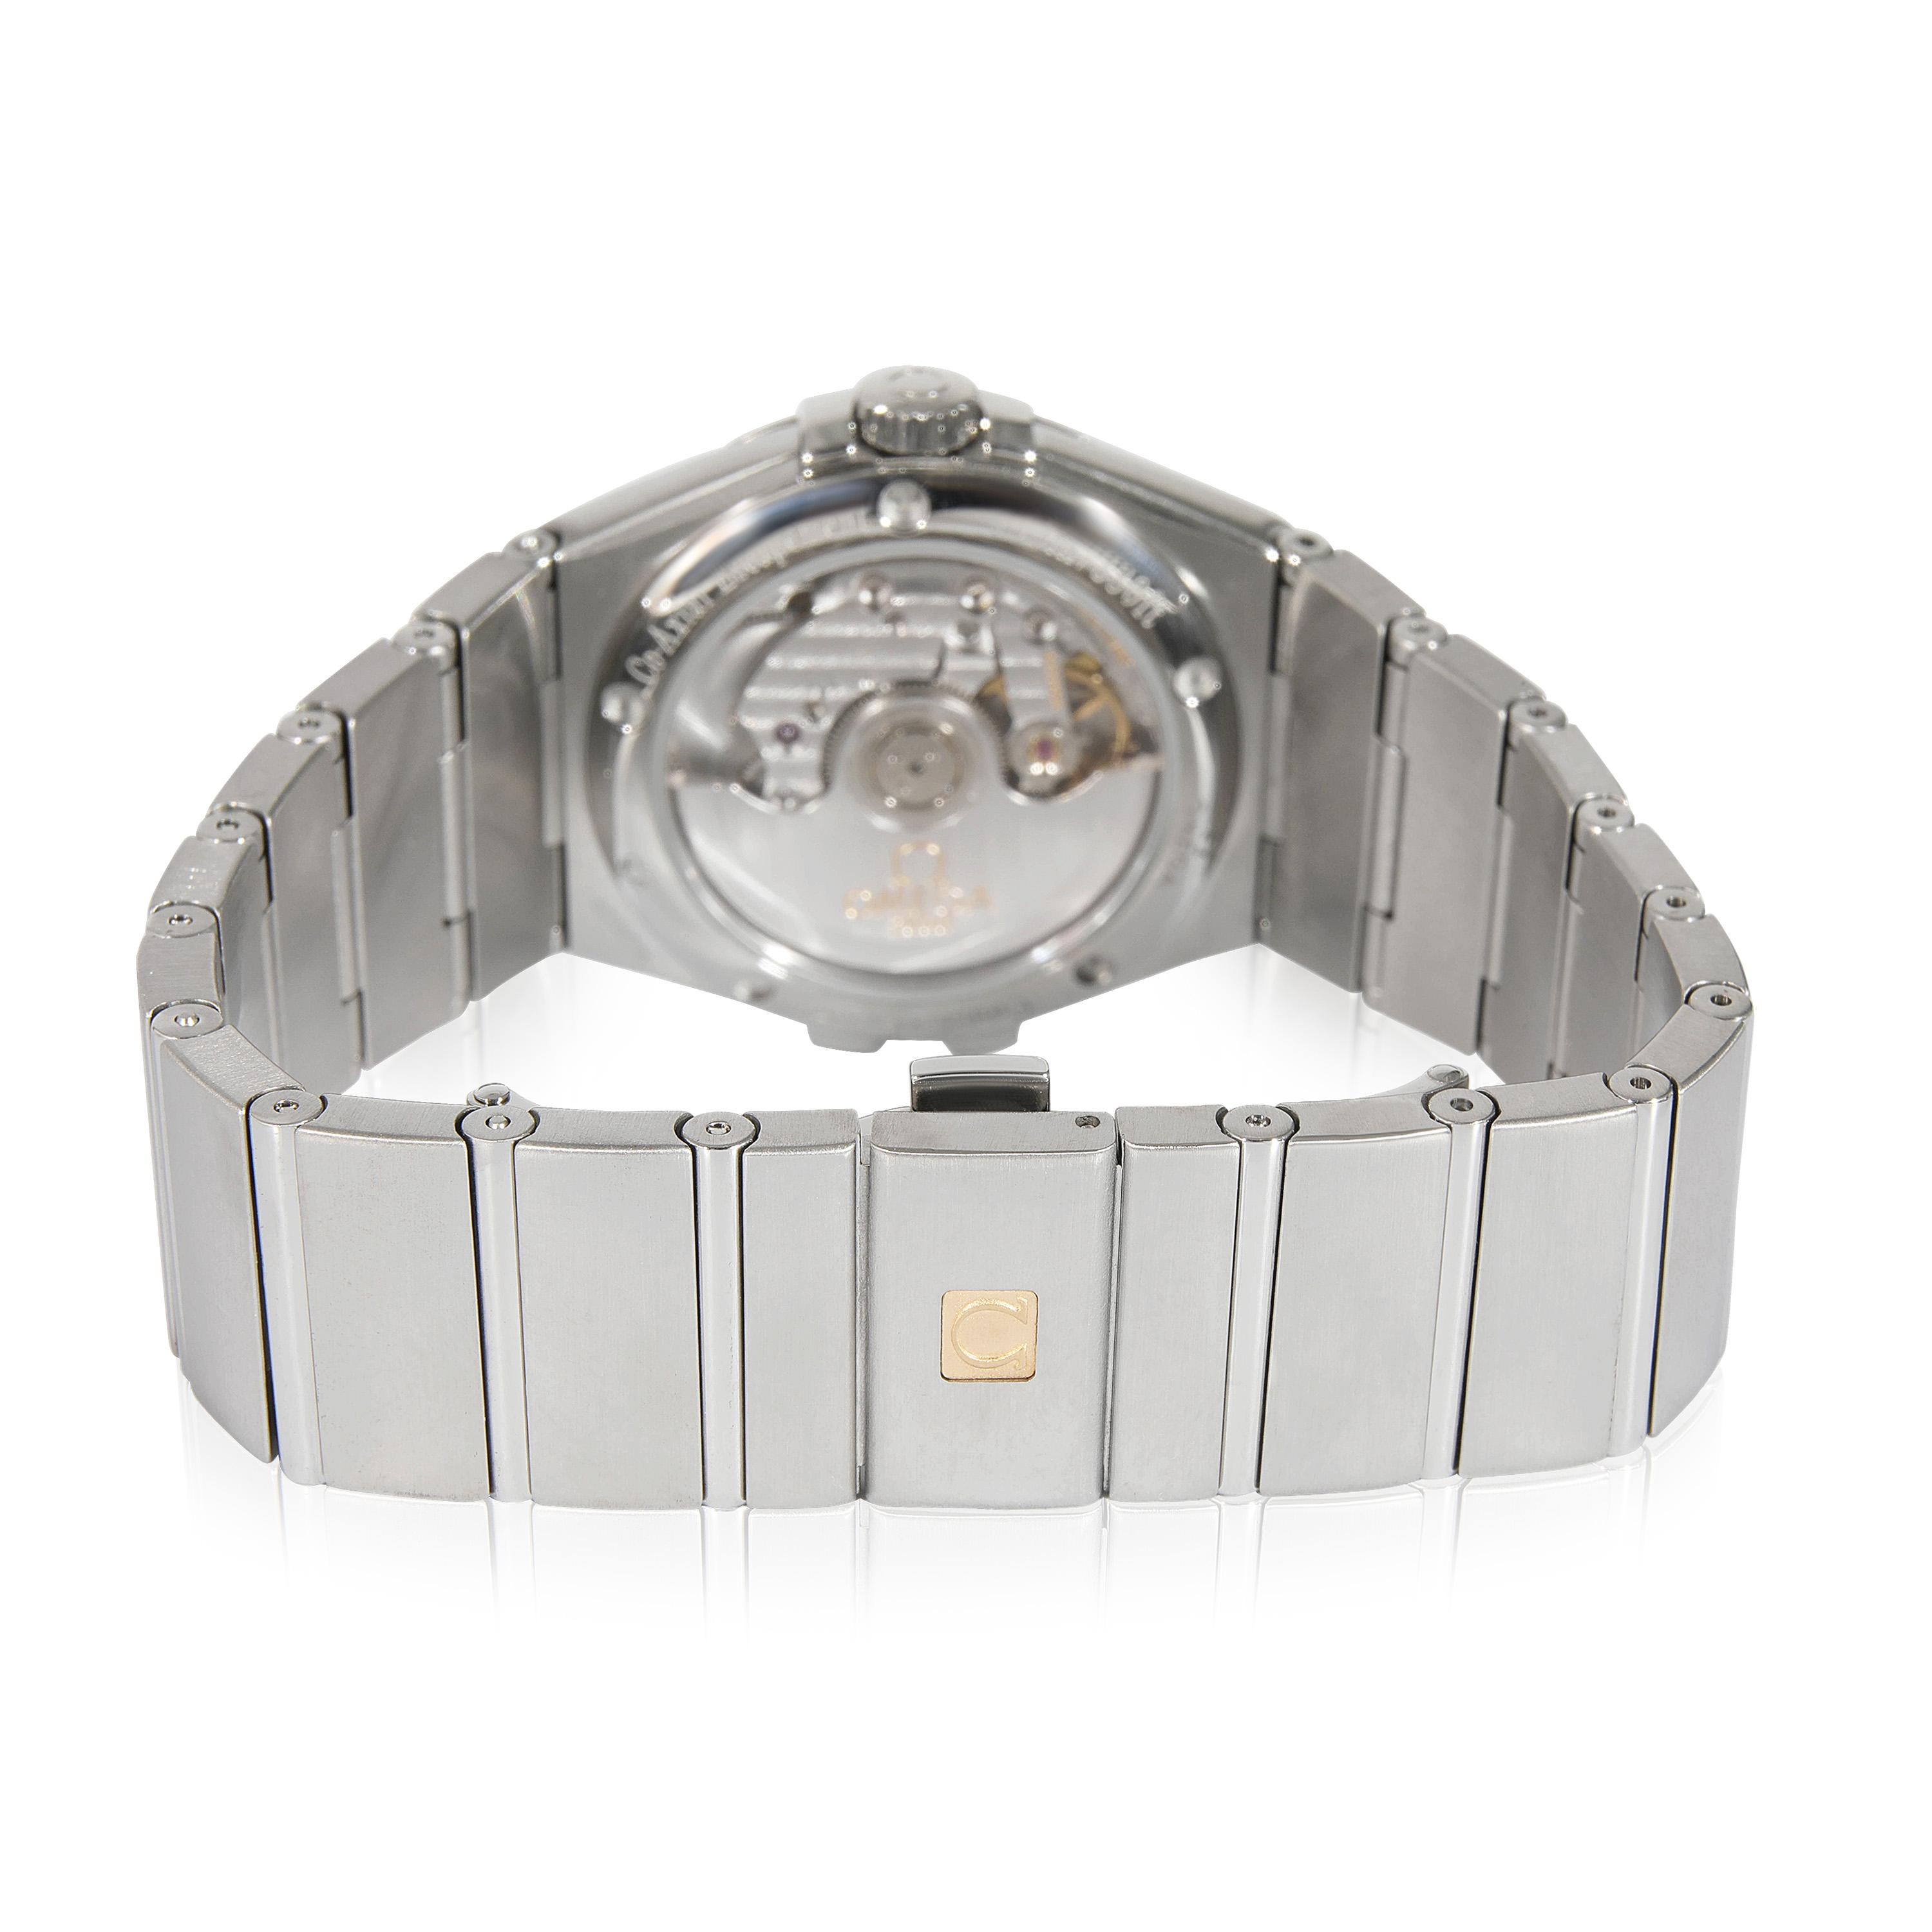 Omega Constellation 123.10.35.20.02.001 Unisex Watch in  Stainless Steel 1